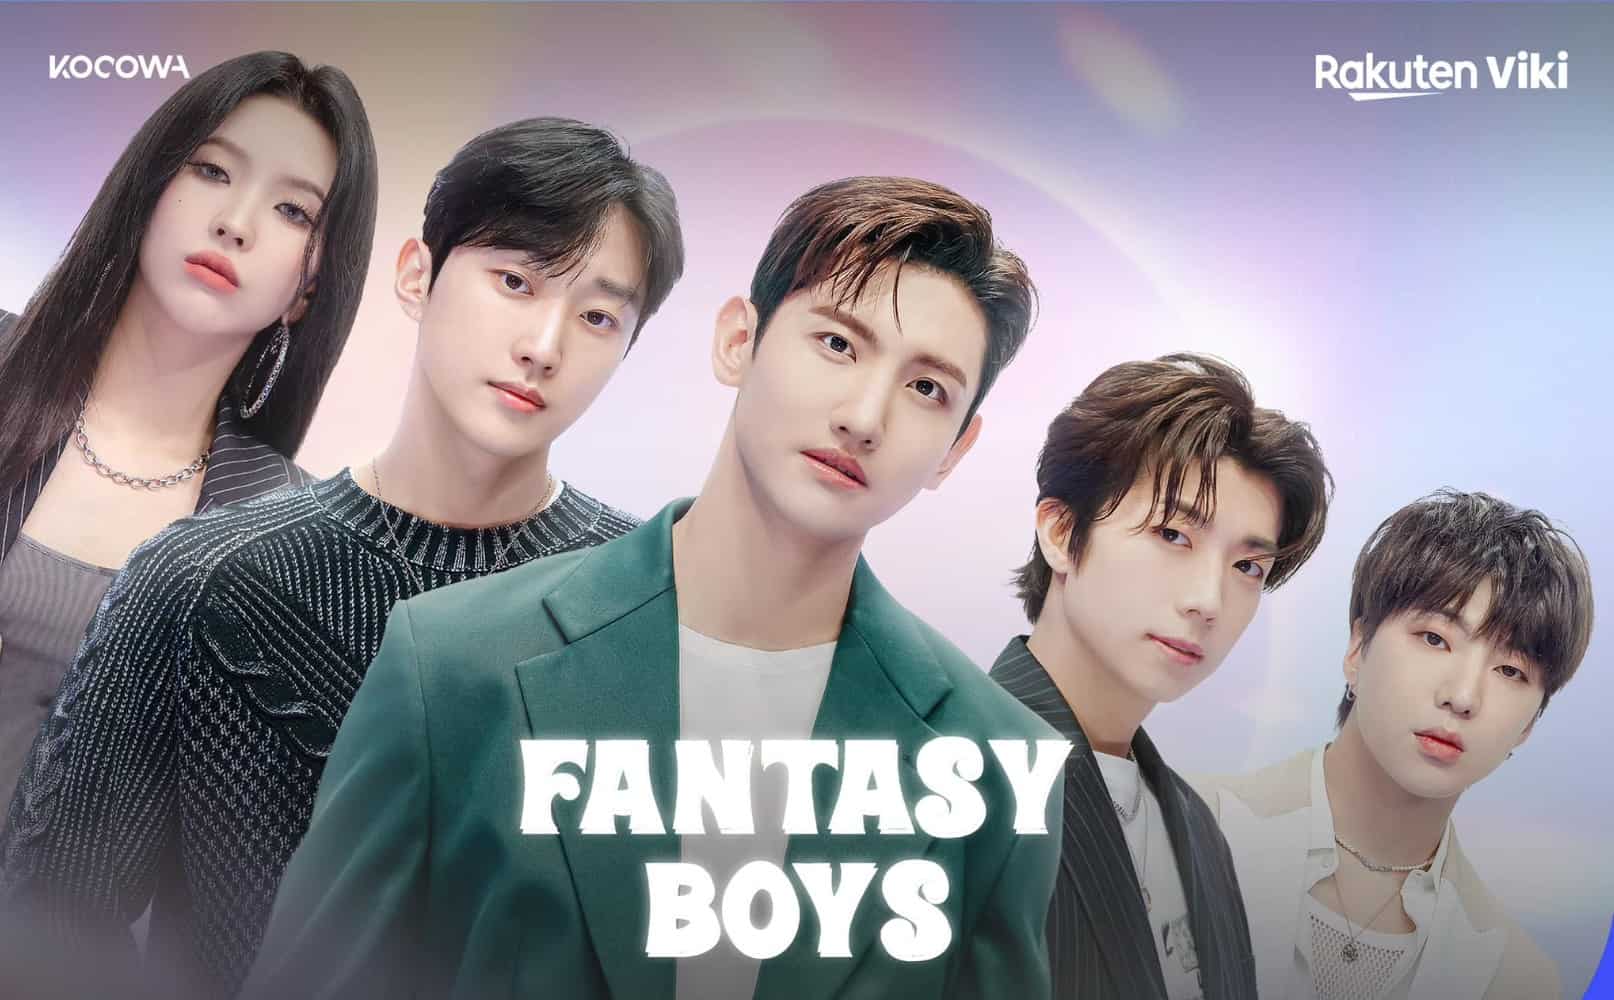 Fantasy Boys Episode 8: Release Date, Preview & Streaming Guide